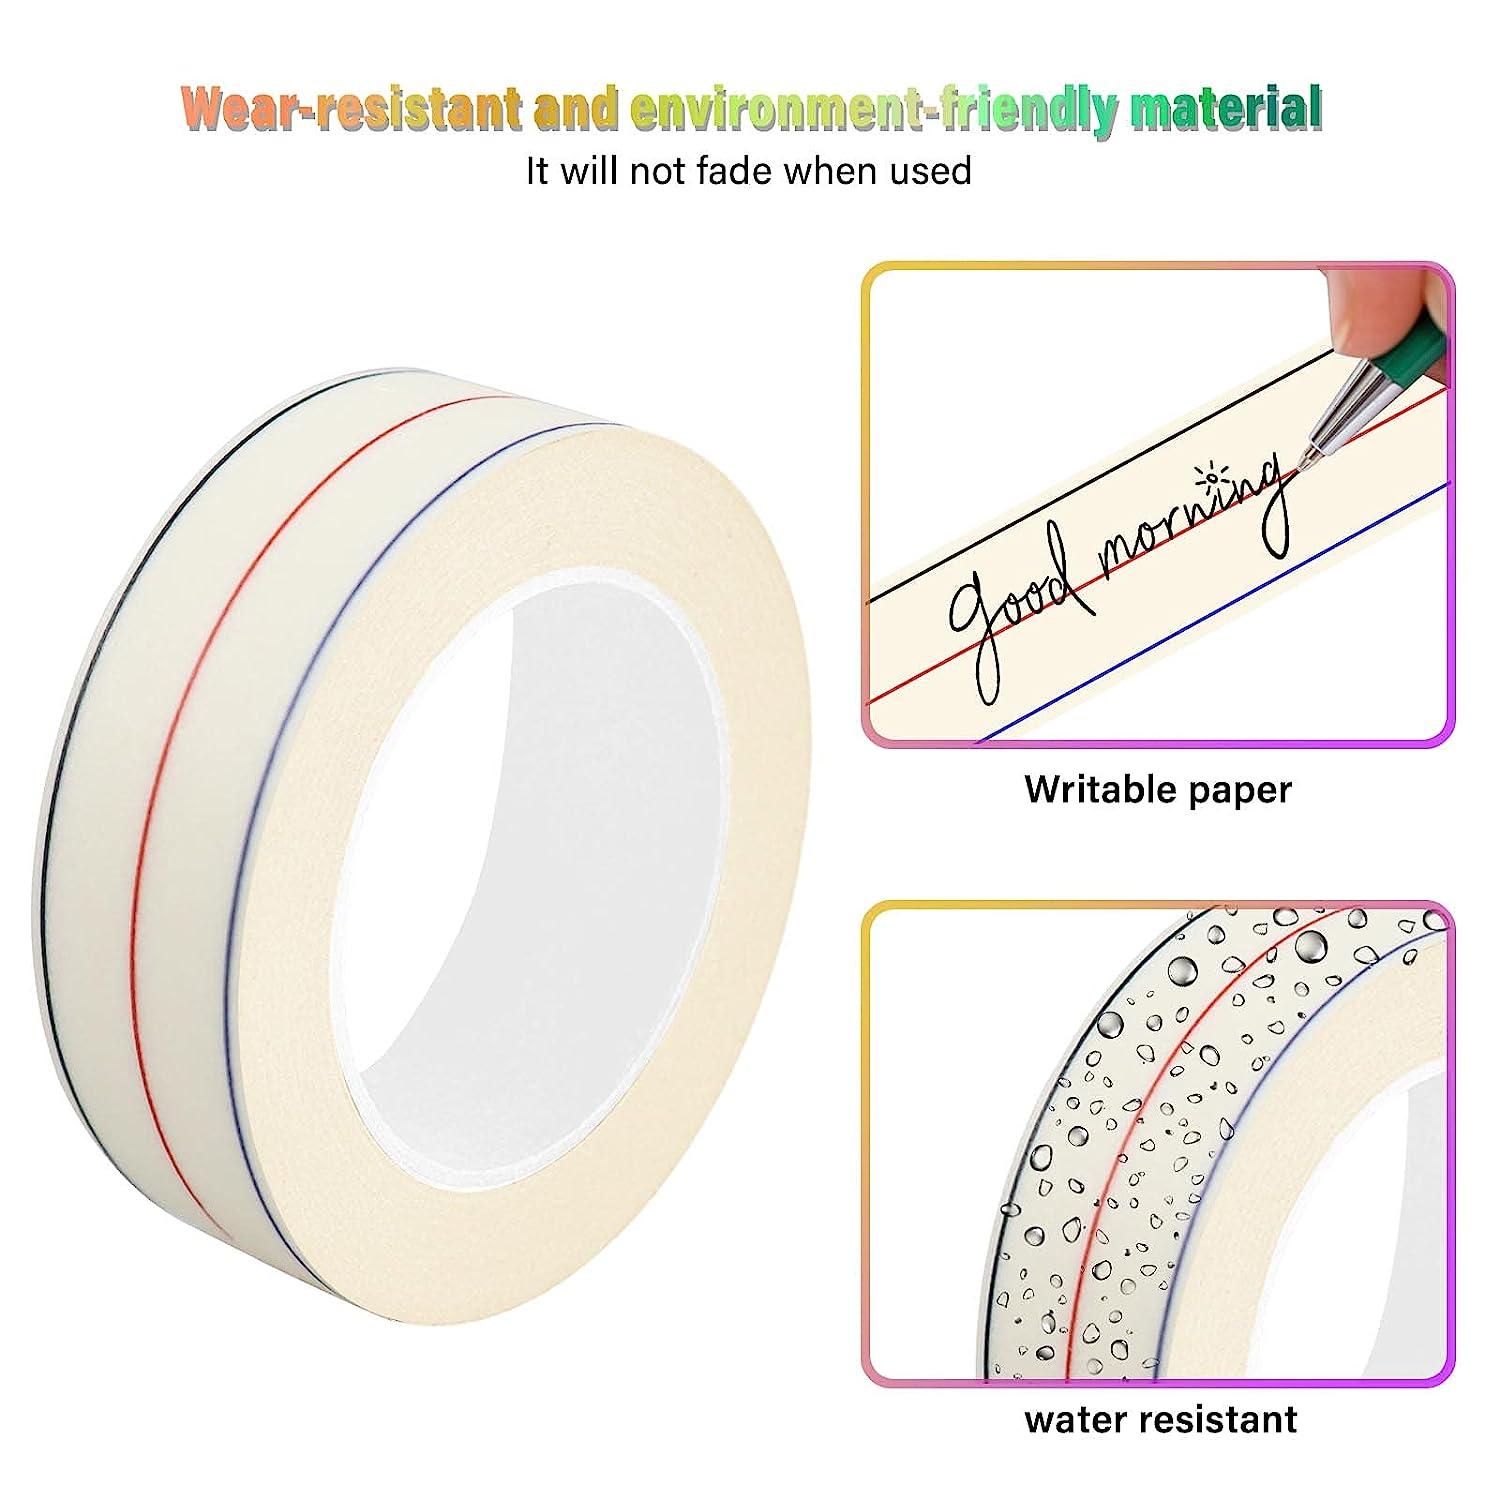 Check out the Diagonal Seam Tape!